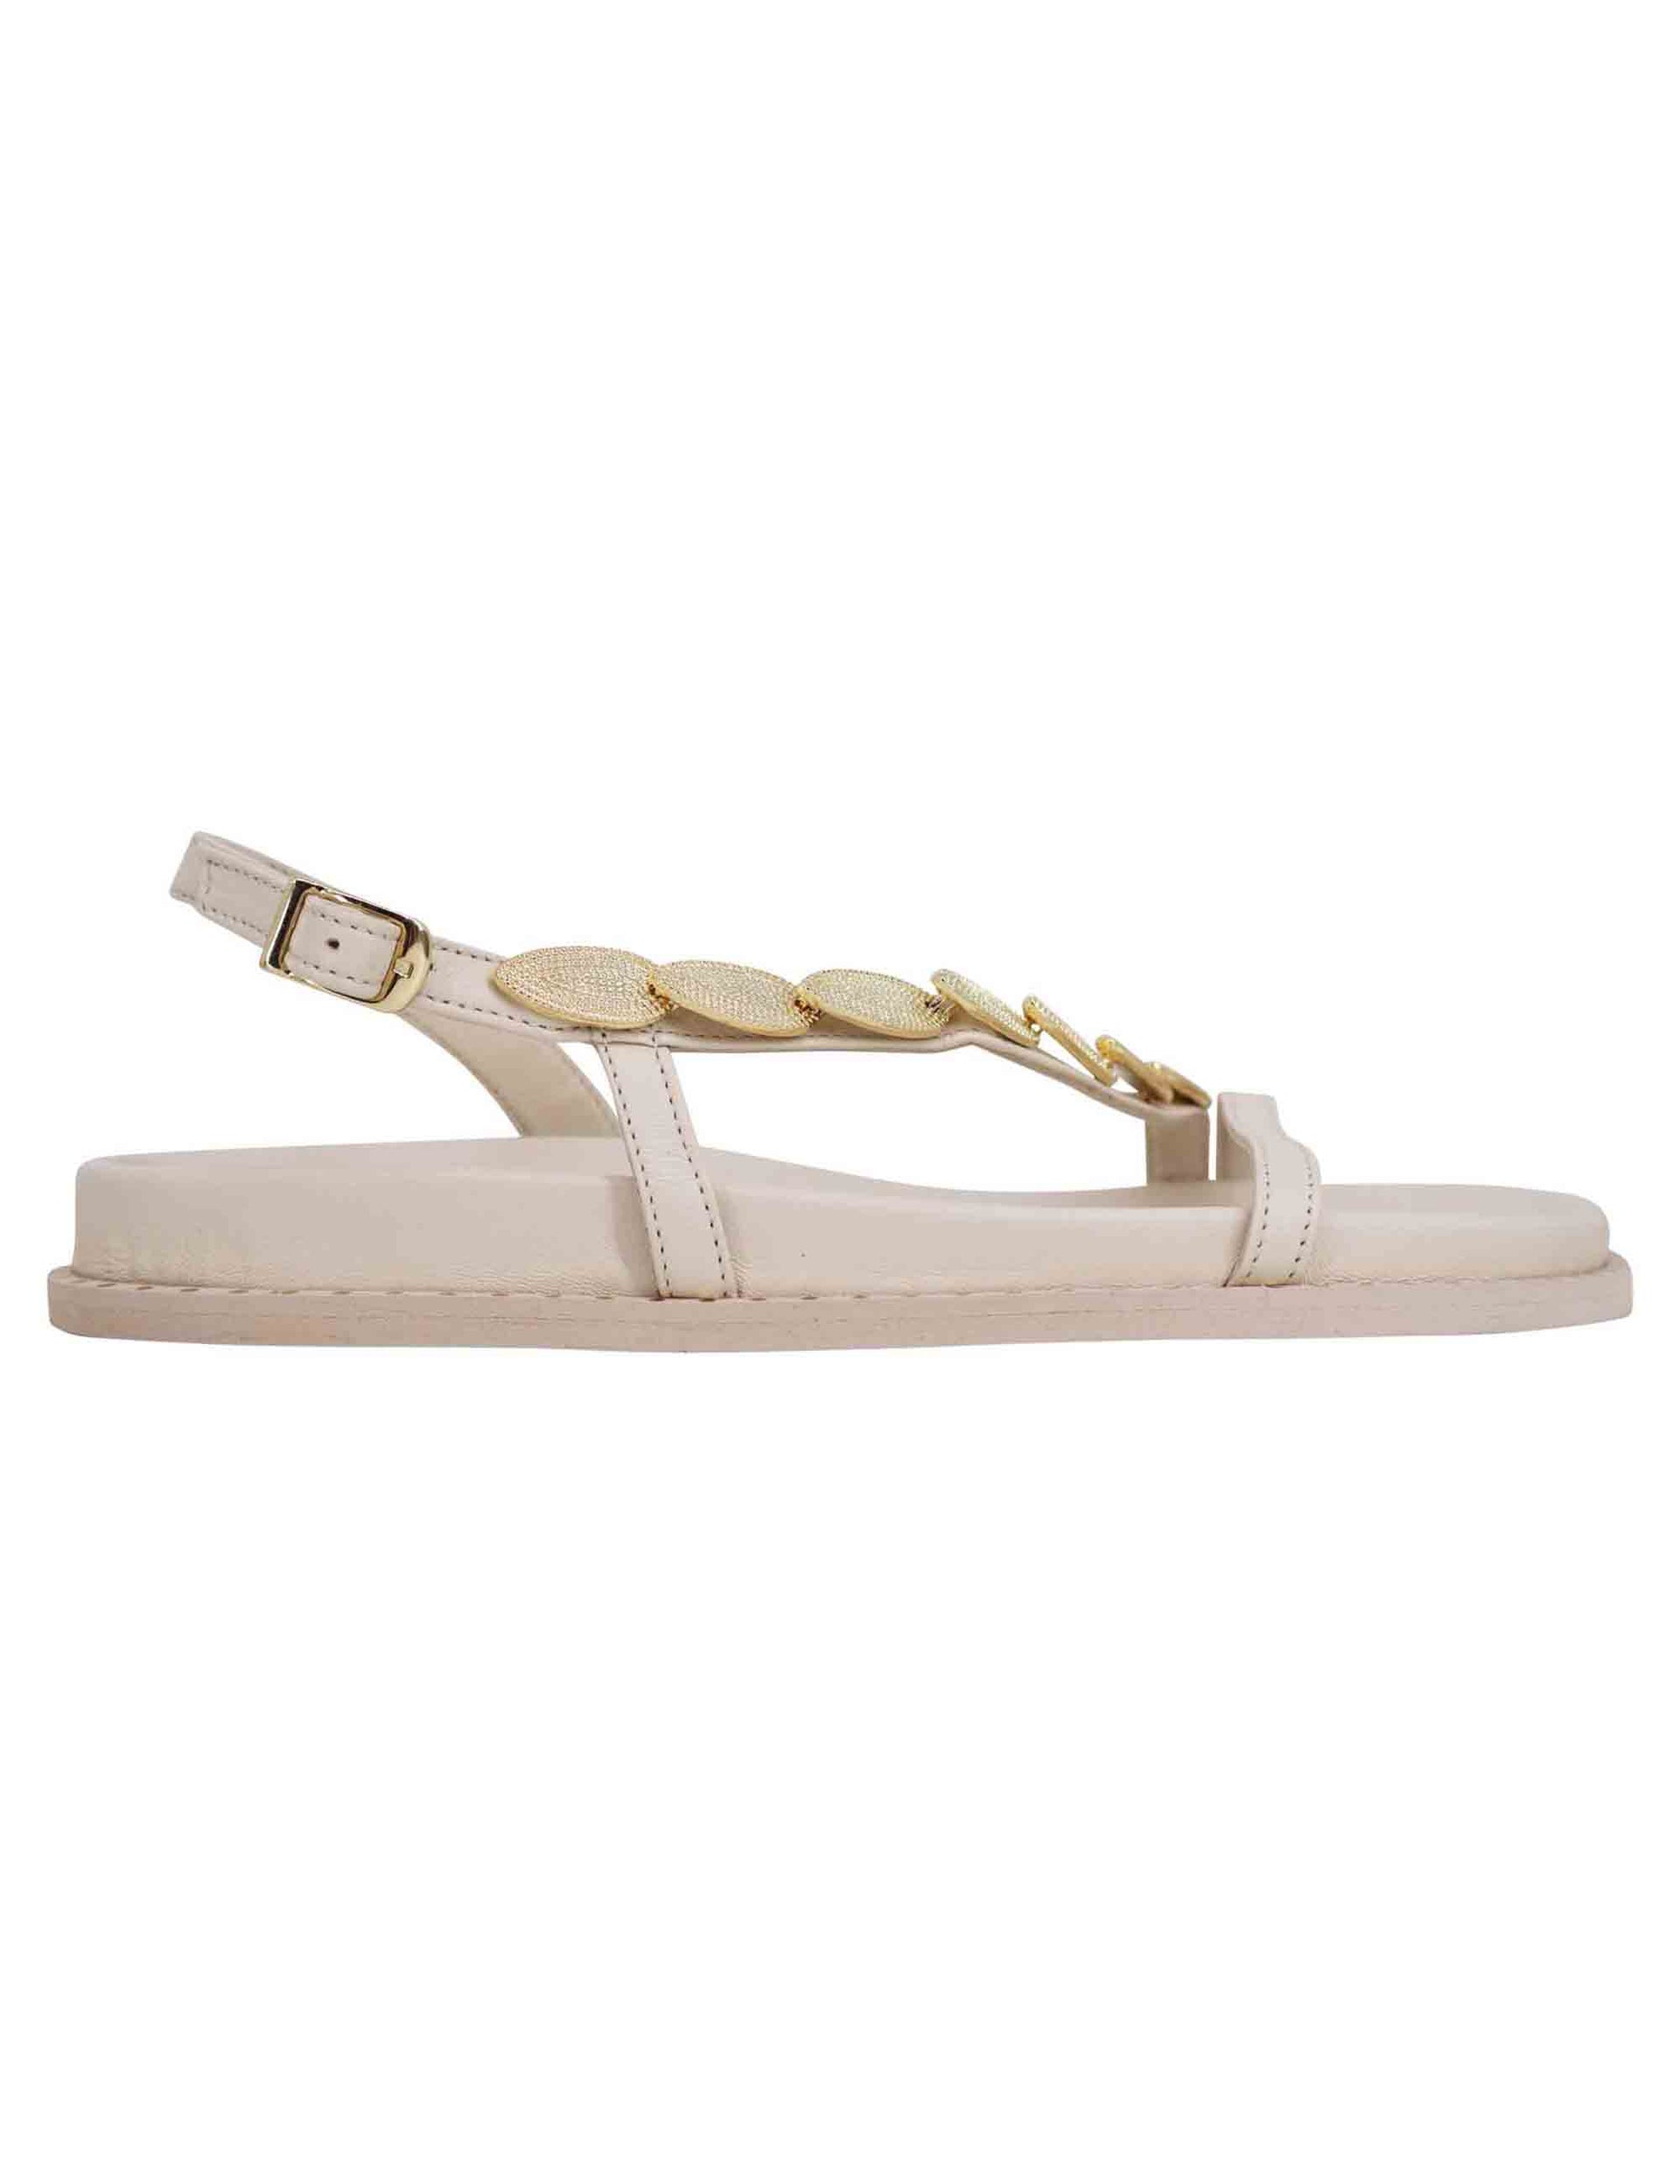 Women's slingback flip-flop sandals in off-white leather with gold leaves